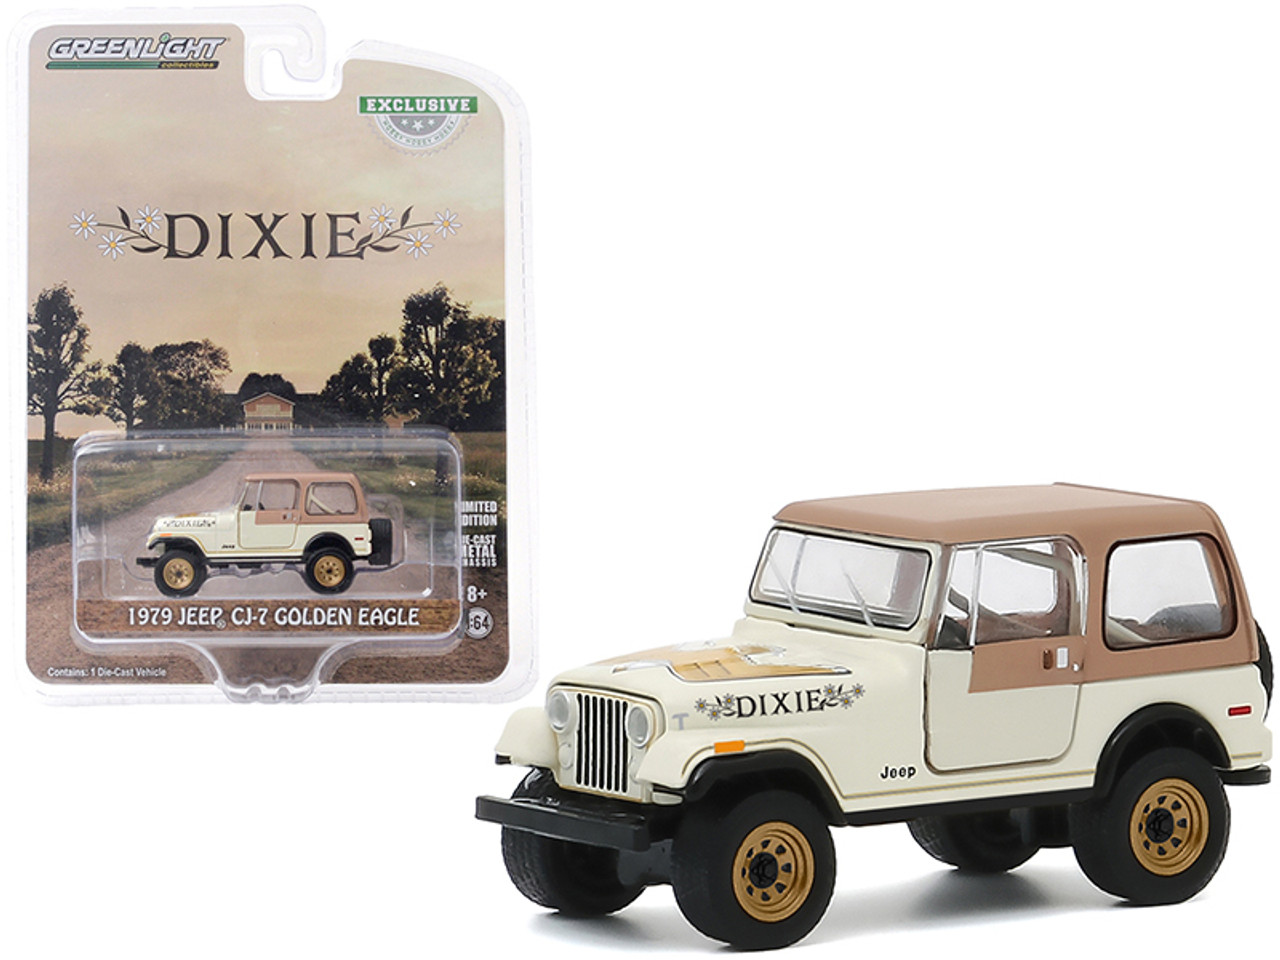 1979 Jeep CJ-7 Golden Eagle "Dixie" Cream "Hobby Exclusive" 1/64 Diecast Model Car by Greenlight